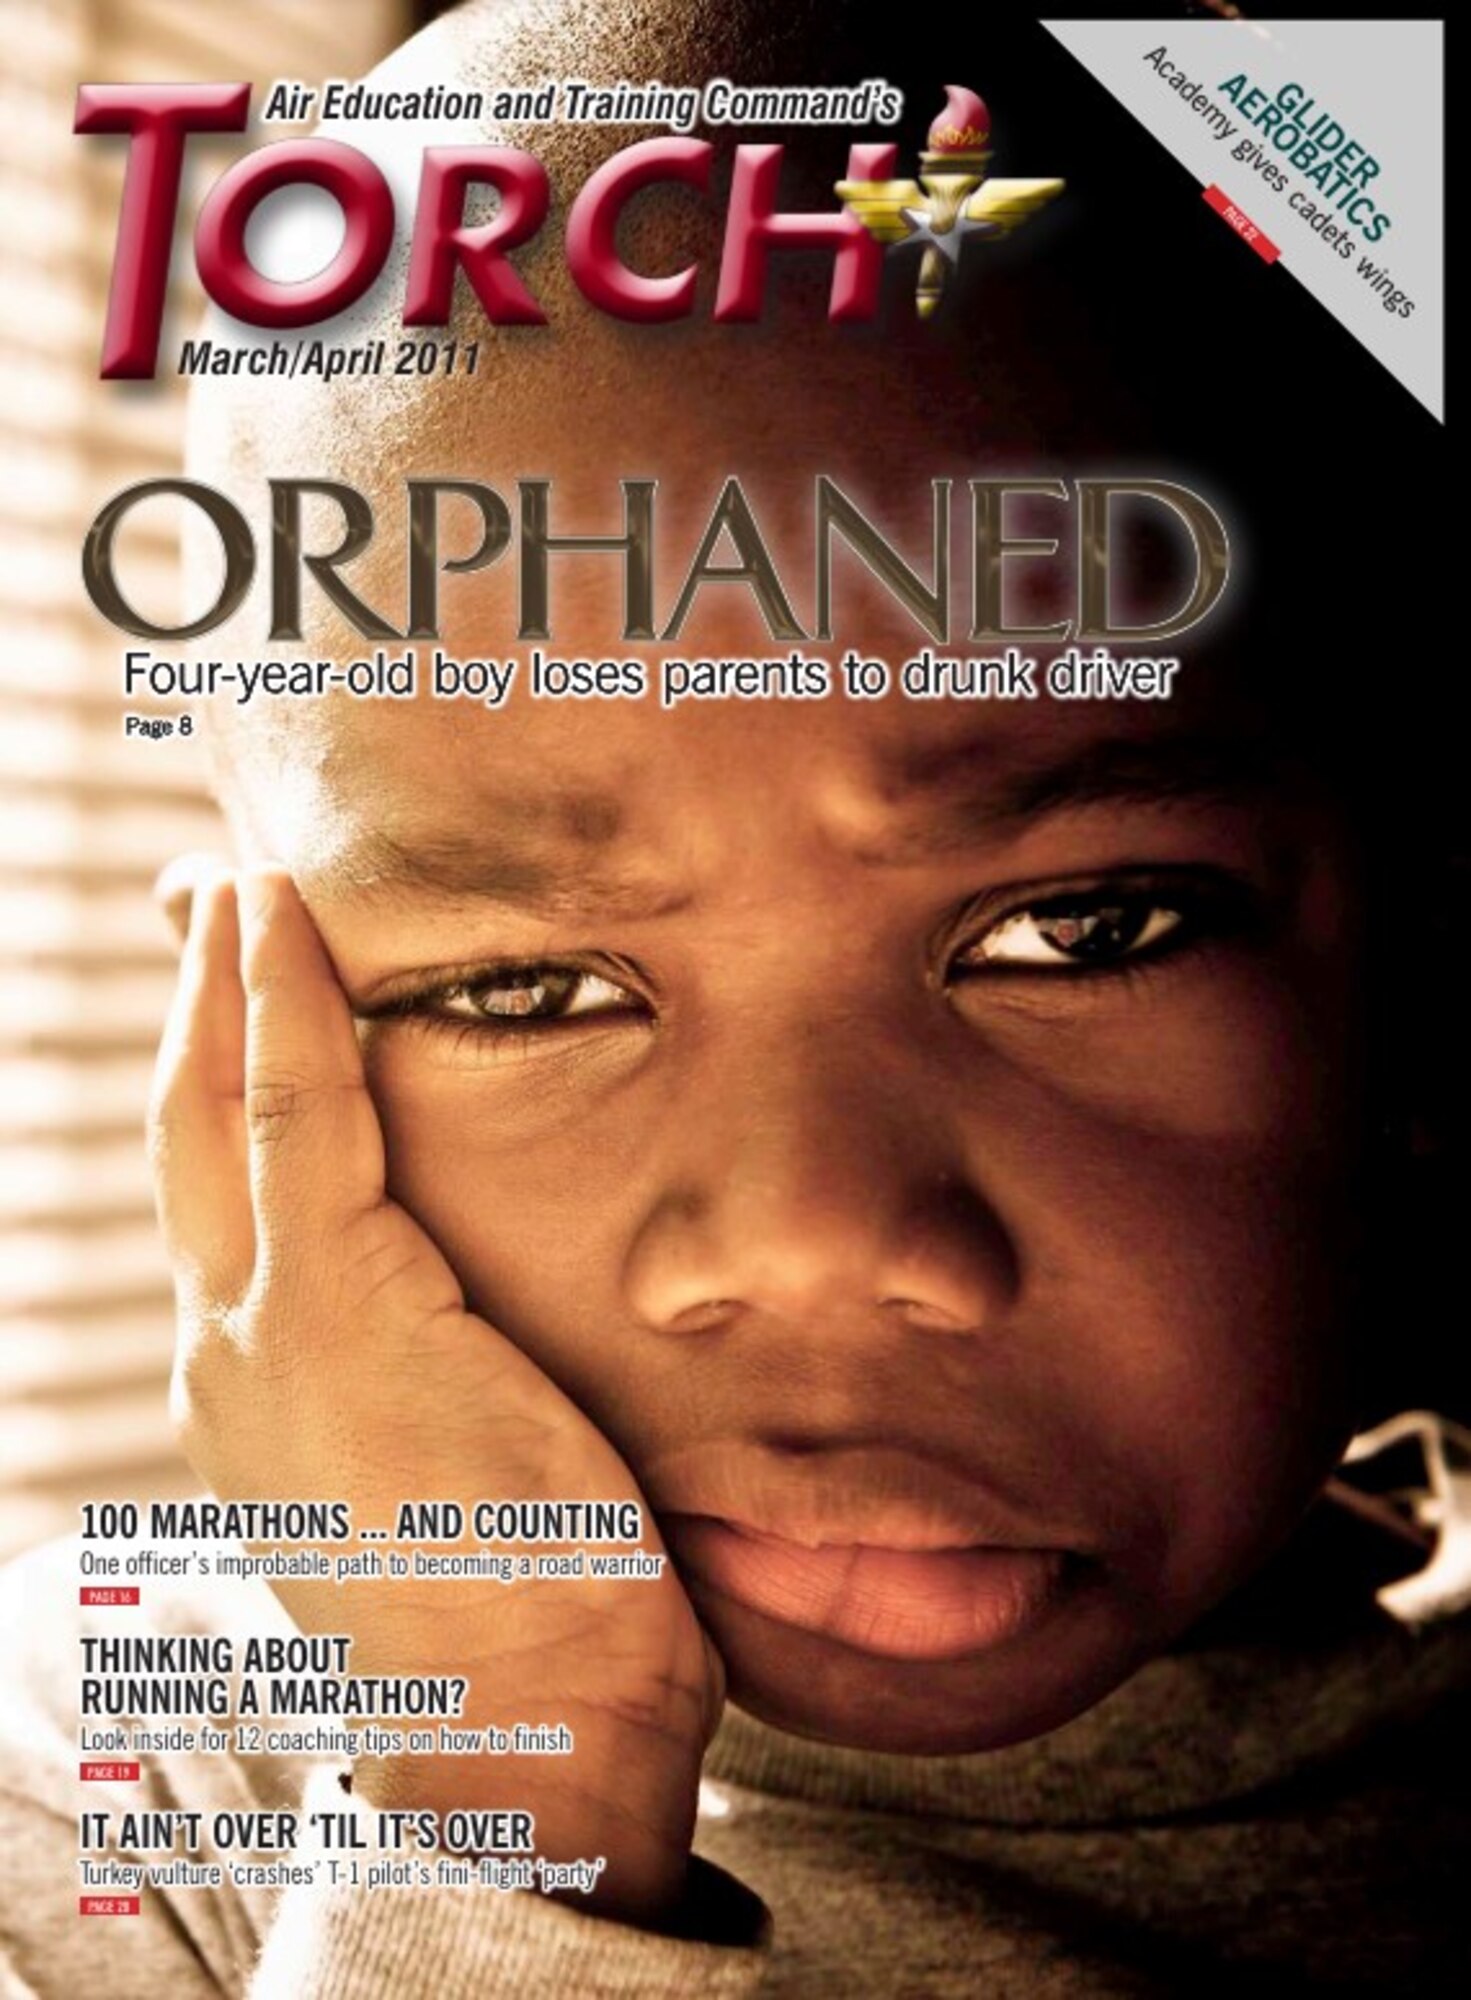 Torch magazine originally ran a story on Nathaniel Britt and his family in its March/April 2011 edition (https://www.torch.aetc.af.mil/Portals/83/documents/AFD-110605-001.pdf?fbclid=IwZXh0bgNhZW0CMTAAAR1TkuX6sCvs2sk4TUf6WpypNHAGs5OiAihWwF8lWMT45W168ov92ezemqw_aem_ARtmbRlHtLcNzki96FFpKCQLQ2Az2jeWbg9Sg72Mlva6AEXYRY2cn4vREDiF7q-NF0tLtMpBH5rd9d7GiEgn2Aol). For the original Torch story printed in 2011, click on Orphaned (https://www.torch.aetc.af.mil/News/Features/Display/Article/365388/orphaned-four-year-old-boy-loses-parents-to-drunk-driver/). For the tragic story on losing his grandpa, click on Orphaned Update (https://www.torch.aetc.af.mil/News/Article-Display/Article/364882/child-orphaned-by-drunk-driver-now-loses-grandpa-update/).